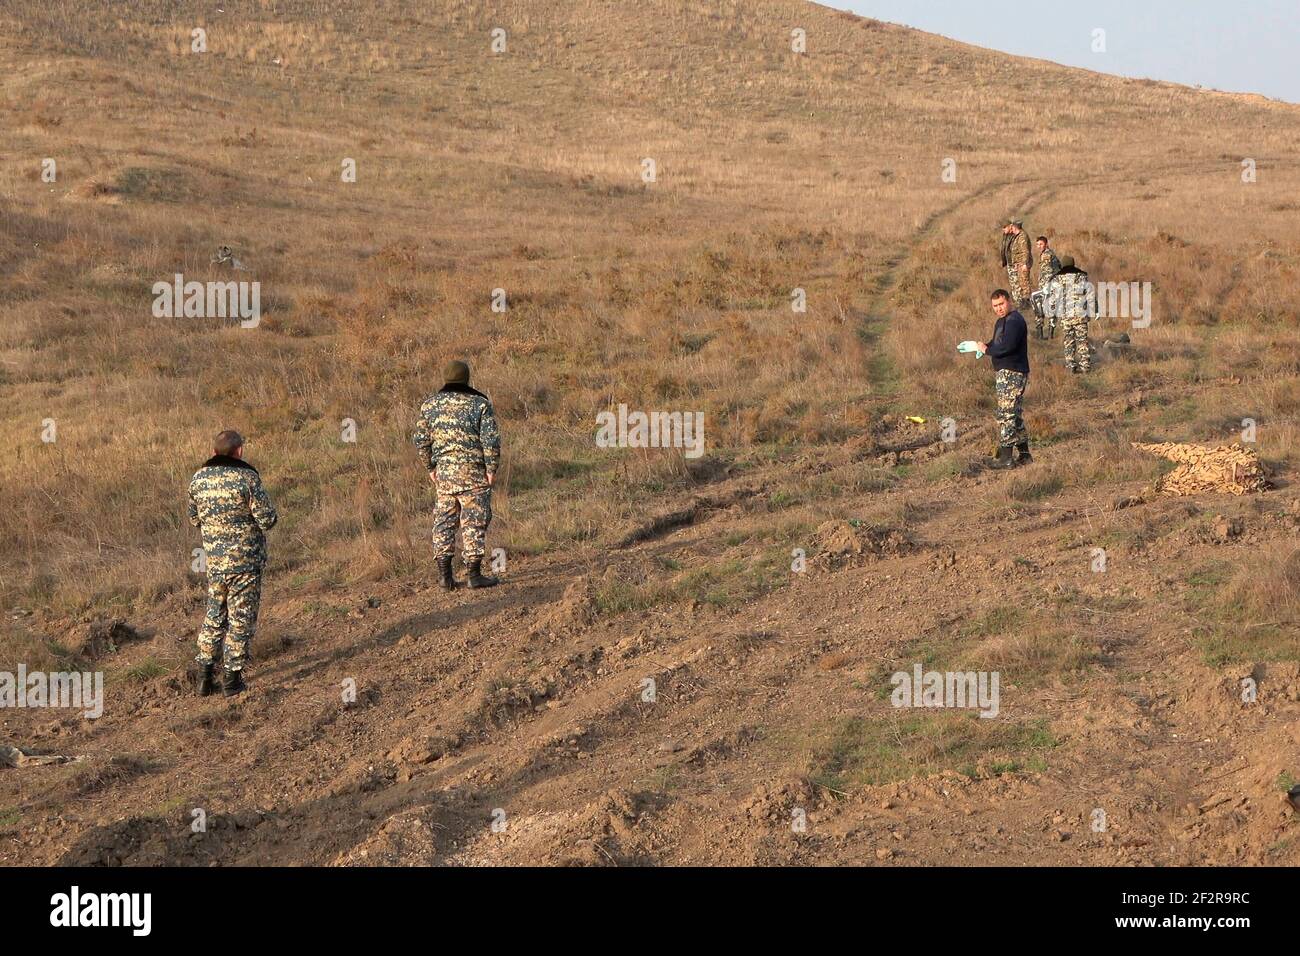 JABRAYIL, AZERBAIJAN - DECEMBER 15: Members of the Russian peacekeeping troops force and Armenian servicemen looking for remains of Armenian fighters killed in the conflict over the disputed region of Nagorno-Karabakh on December 15 2020 in the Jabrayil Rayon of Azerbaijan. Heavy clashes erupted over Nagorno-Karabakh in late September during which more than 5,600 people, including civilians, were killed. The sides agreed to a Russia-brokered cease-fire deal that took effect on November 10, resulting in Azerbaijan regaining control over swaths of territory ethnic Armenians had administered for Stock Photo